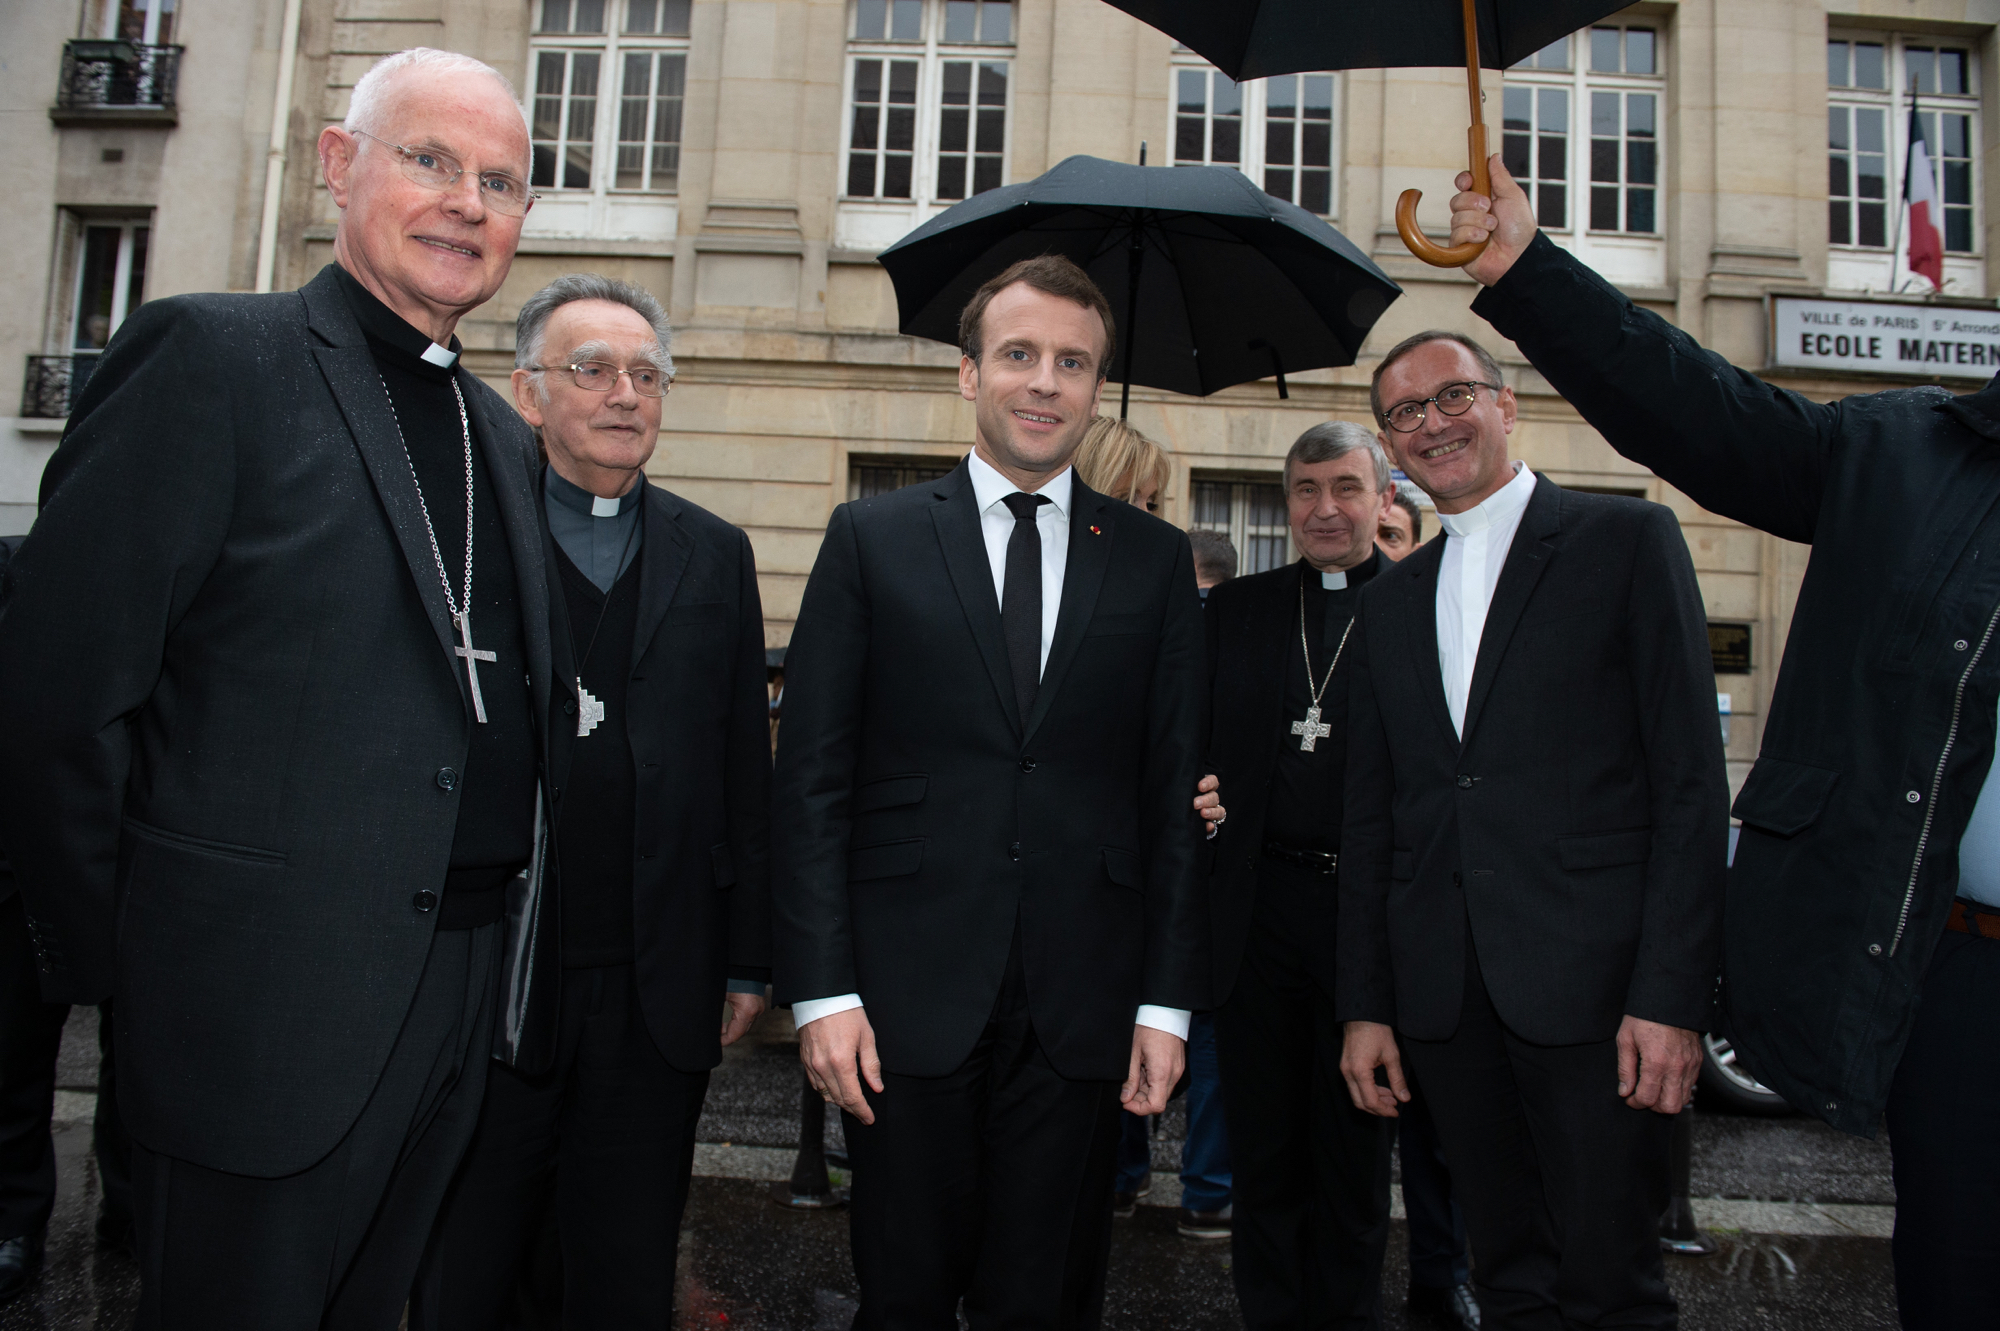 Macron outlines positive view of Church-State links